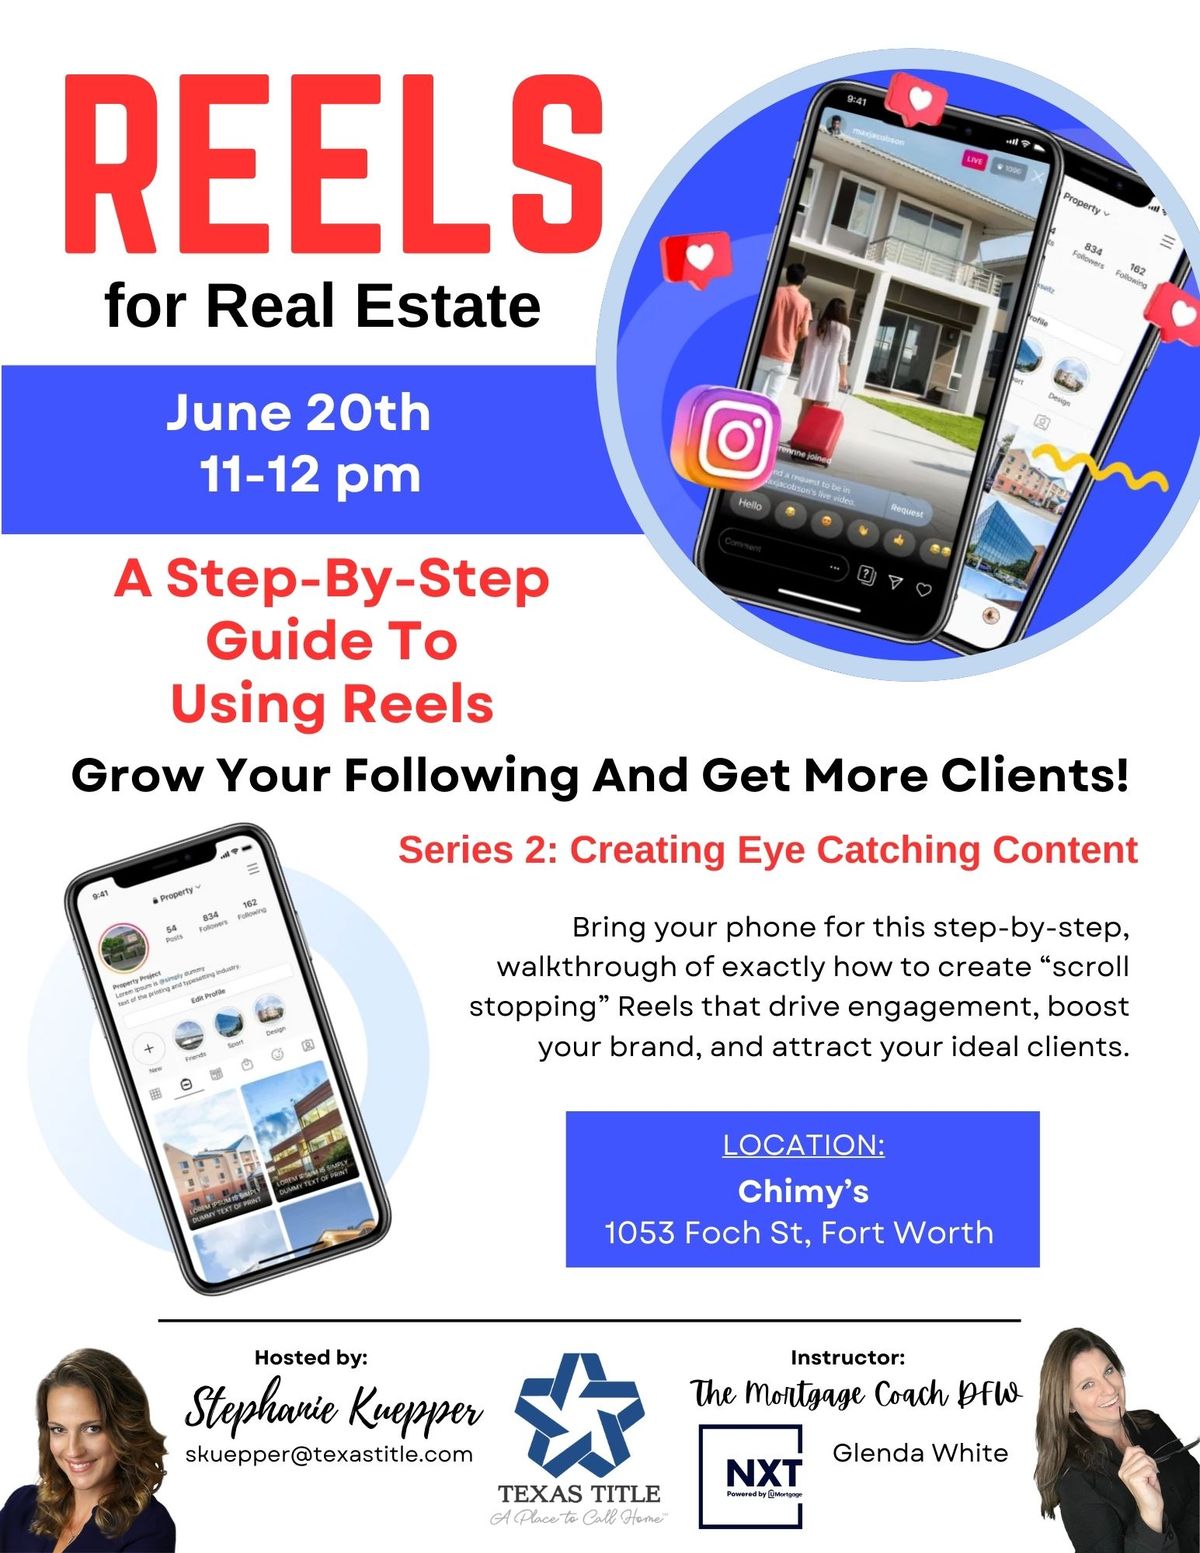 Reels for Real Estate #2. Lunch & Learn Social Media Series